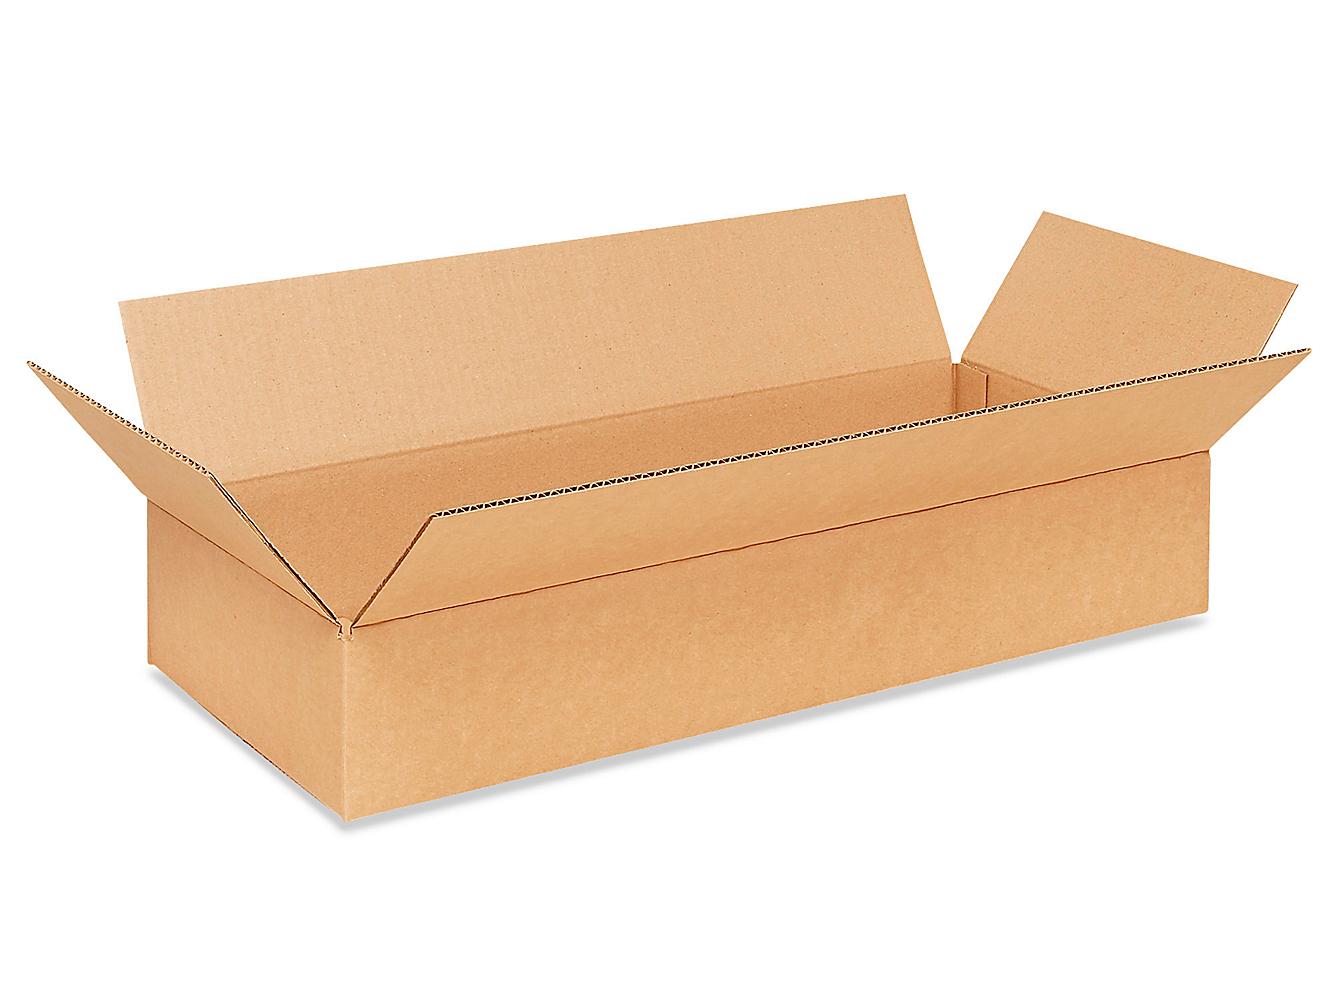 25  10 x 10 x 24 Corrugated Shipping Boxes Packing Storage Cartons Cardboard Box 